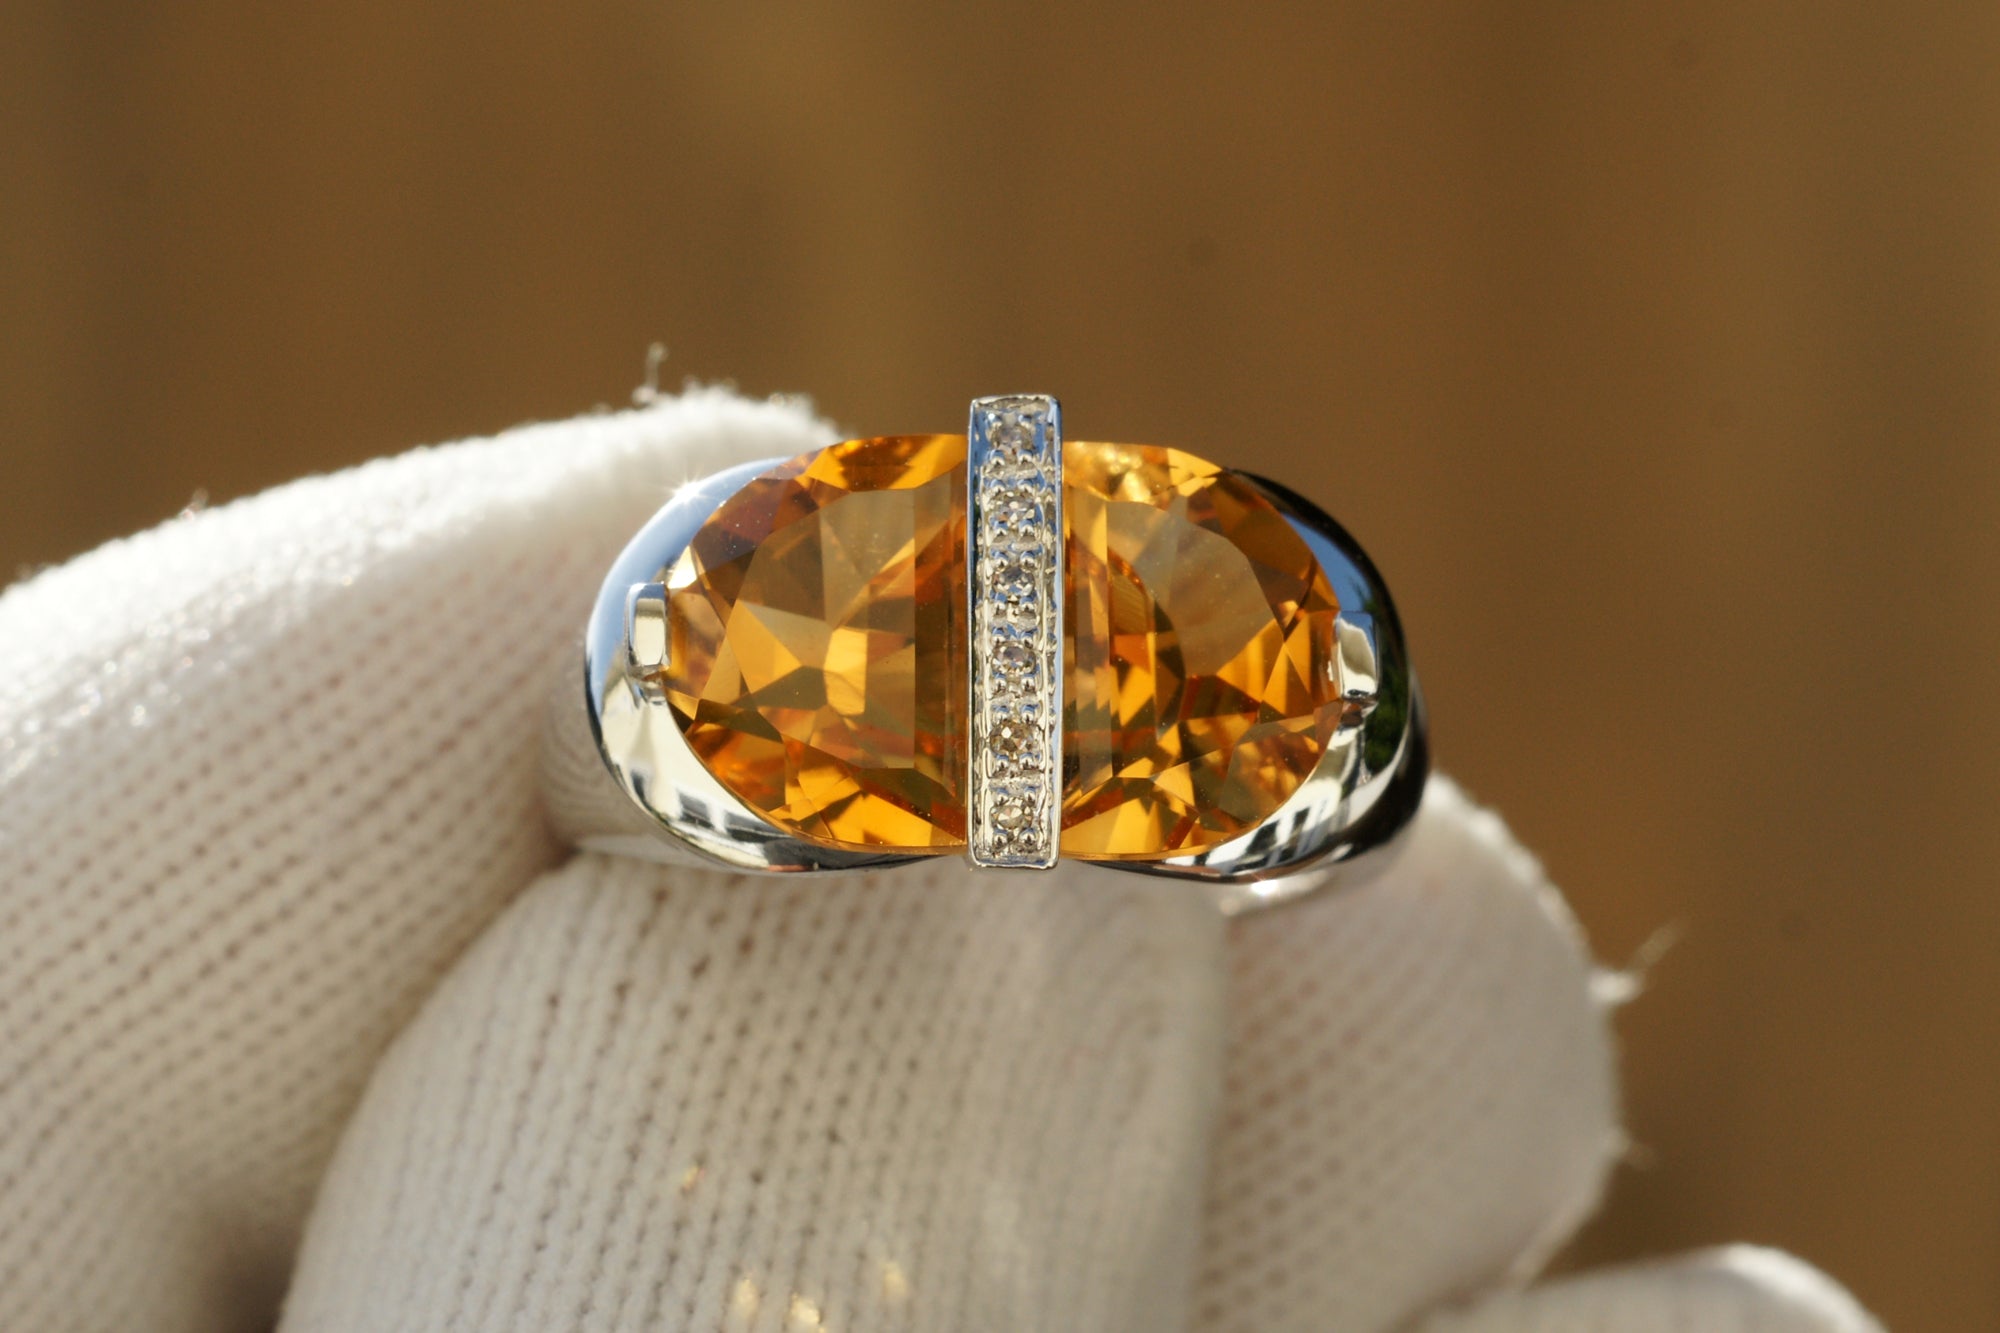 CLEARANCE - The Half Moons Citrine Signet Ring